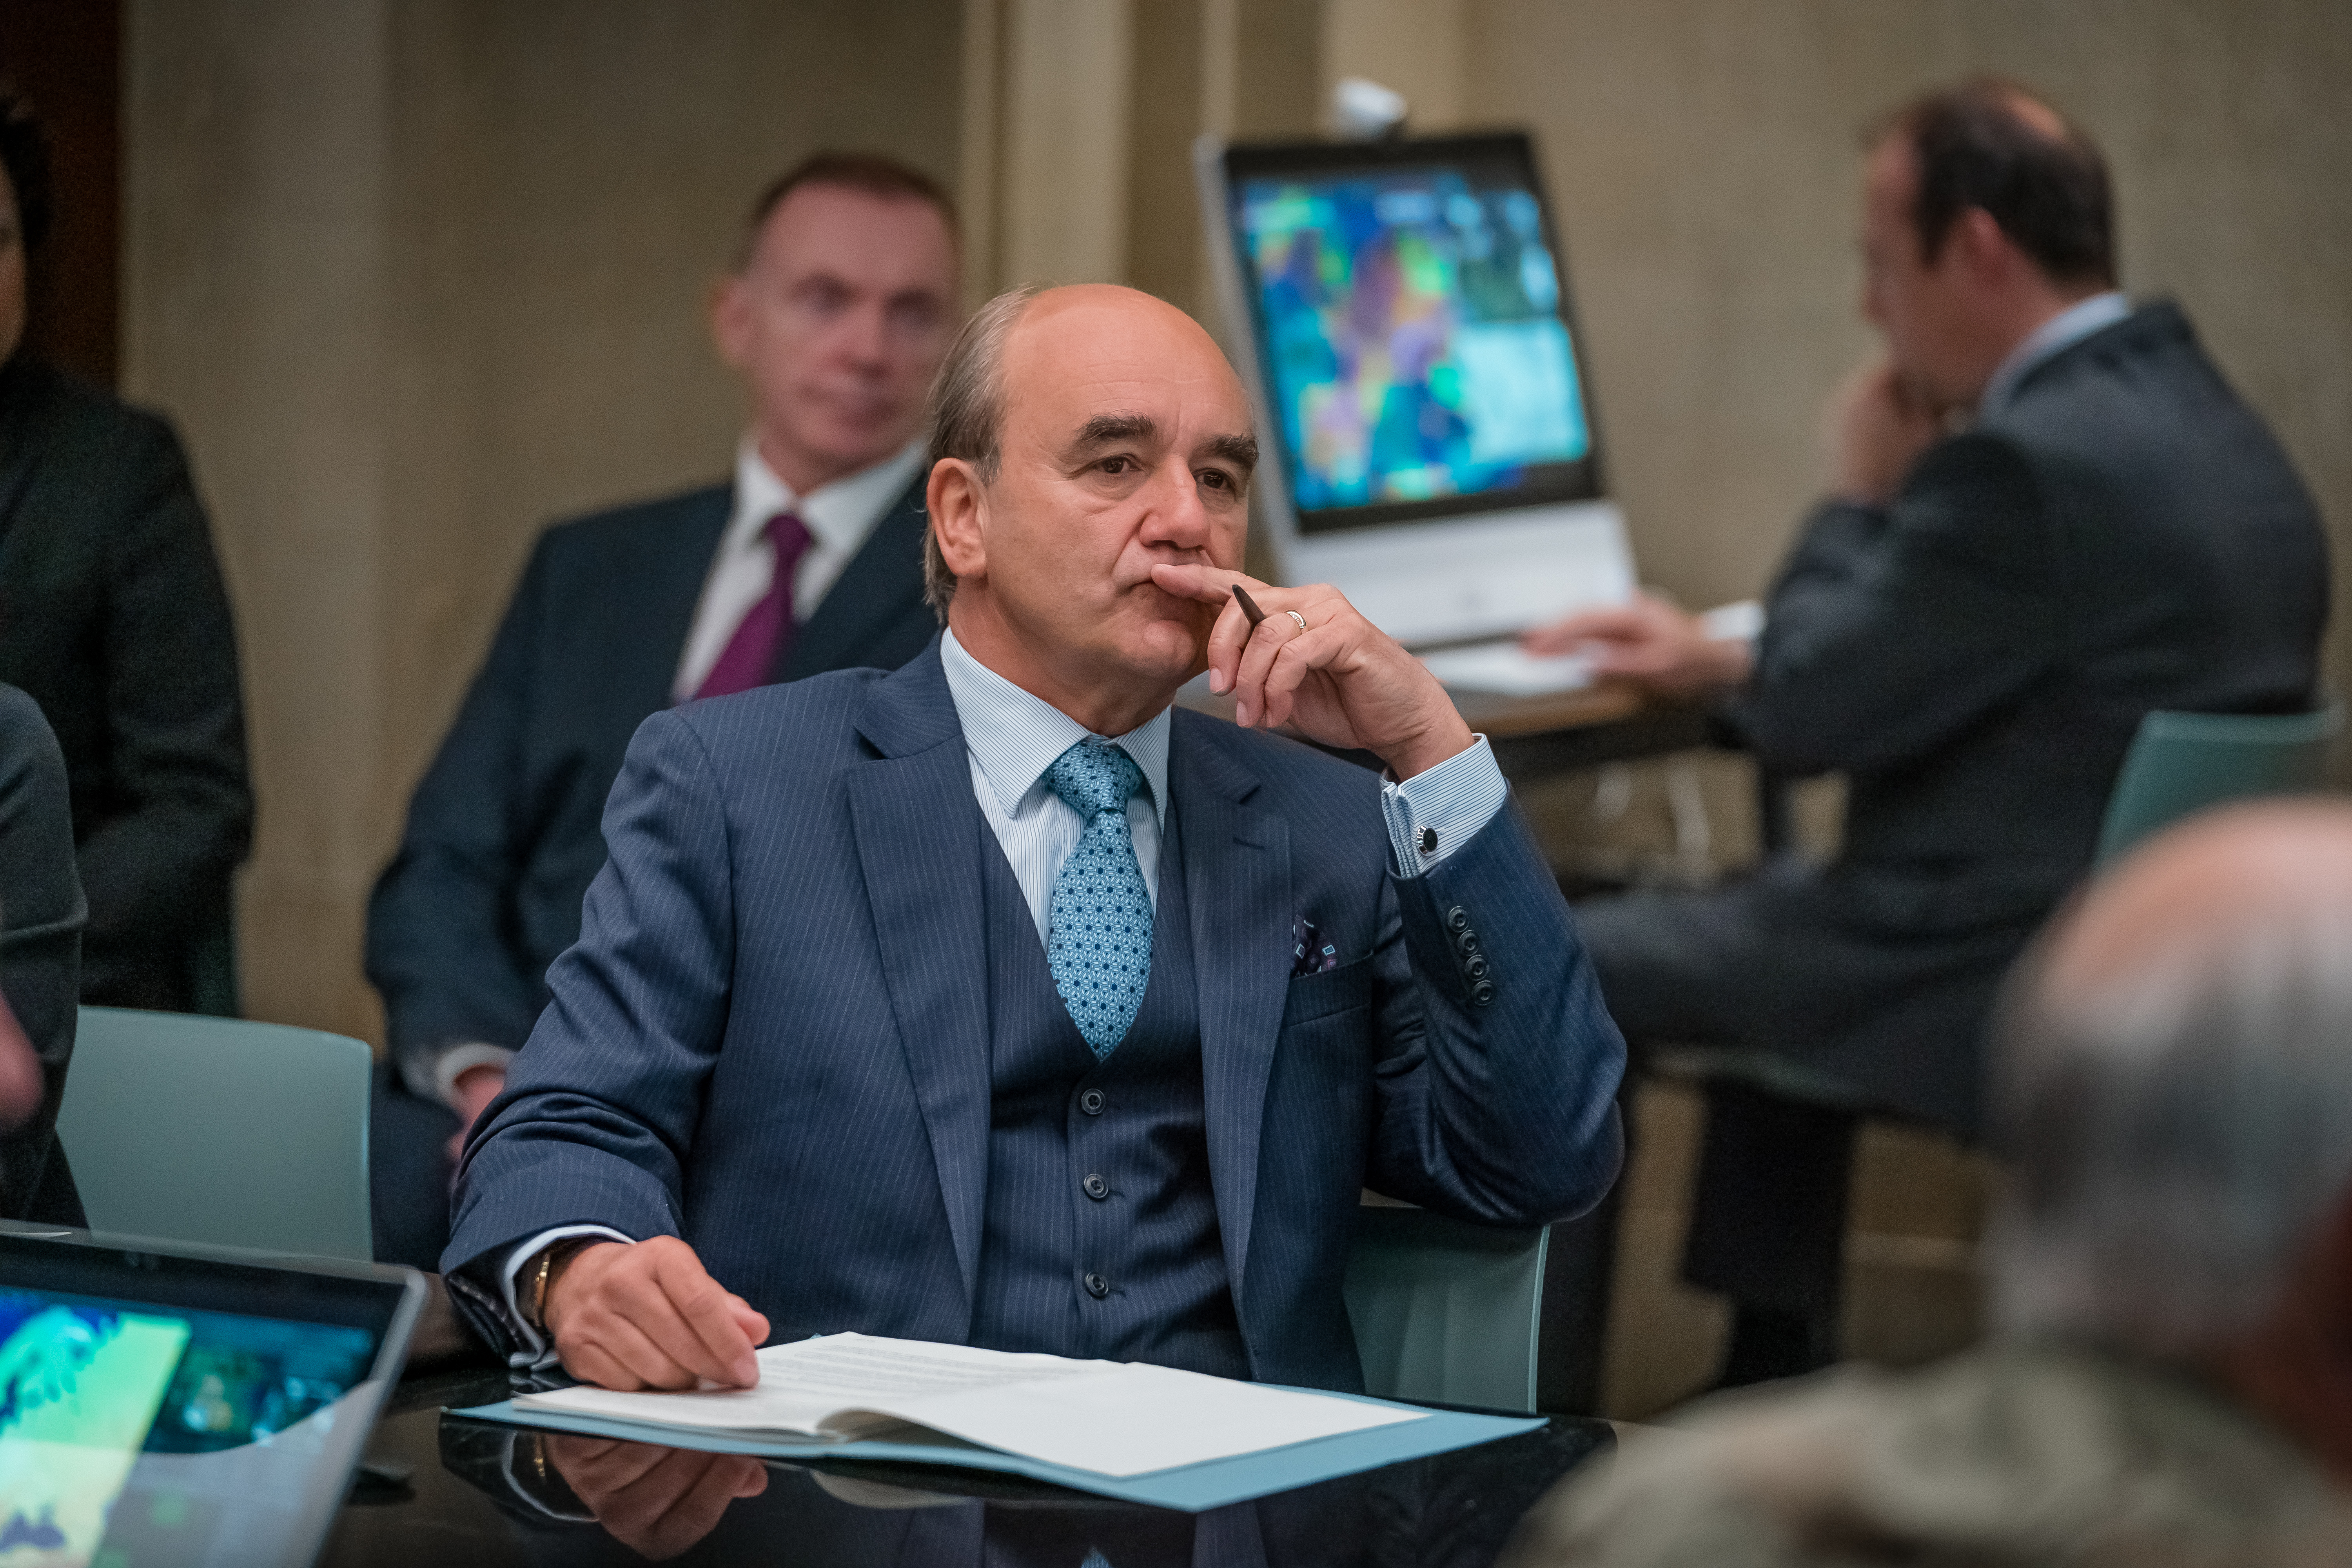 Archie Glover-Morgan (David Haig) Credit: Courtesy of © 2021 New Pictures Ltd